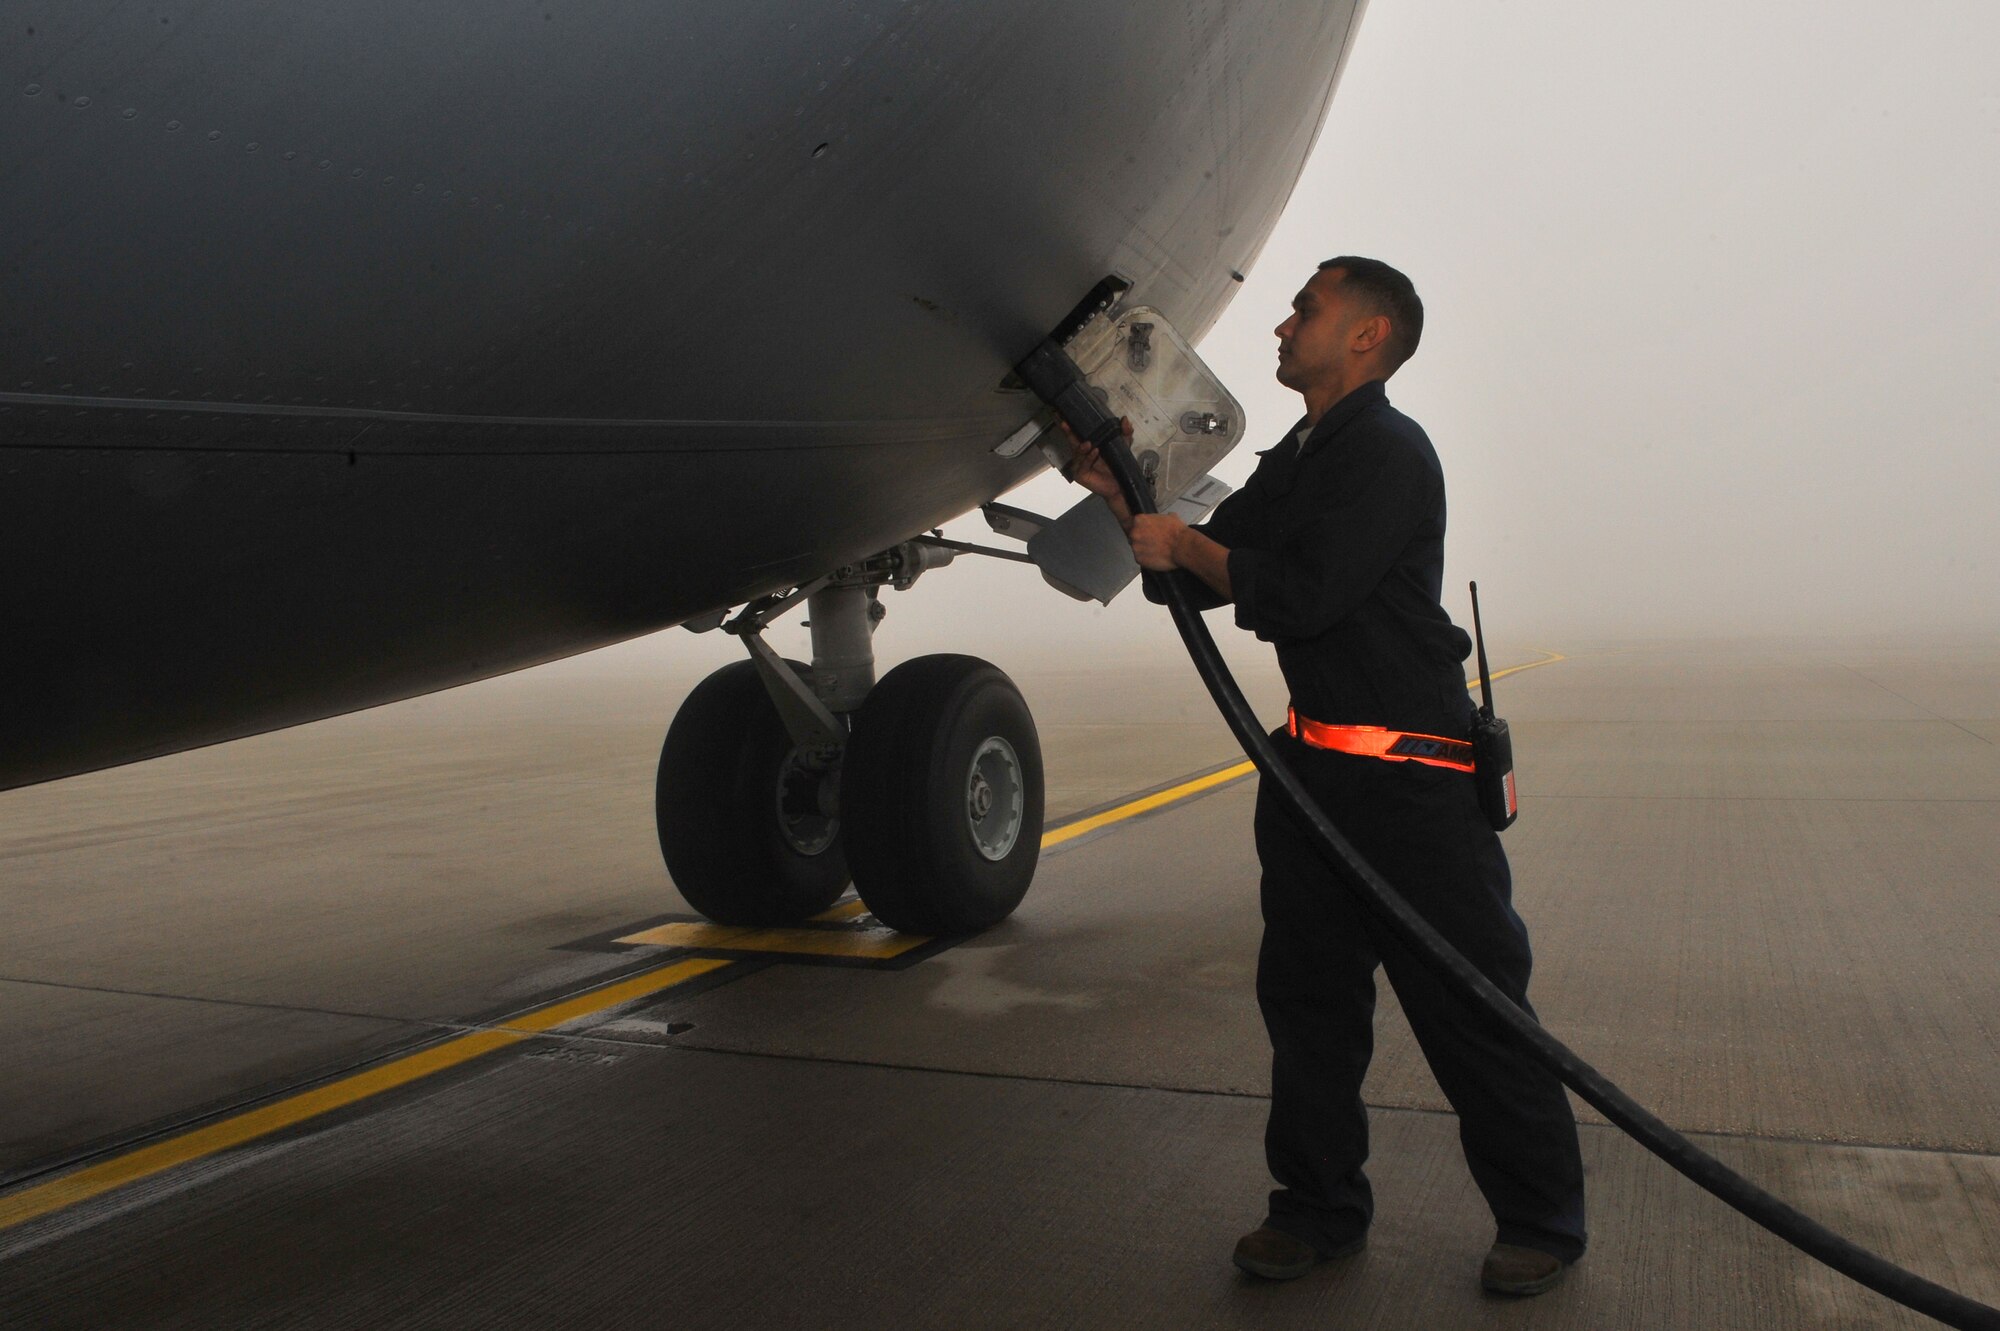 SPANGDAHLEM AIR BASE, Germany – Staff Sgt. Mark Lipumano, 726th Air Mobility Squadron electrical environmental craftsman, attaches a power cable to a C-17 Globemaster III during a pre-flight inspection here Nov. 9. The 726th AMS is a strategic transit hub in Europe and provides support for heavy cargo aircraft and aircrews throughout the world. (U.S. Air Force photo/Airman 1st Class Dillon Davis)